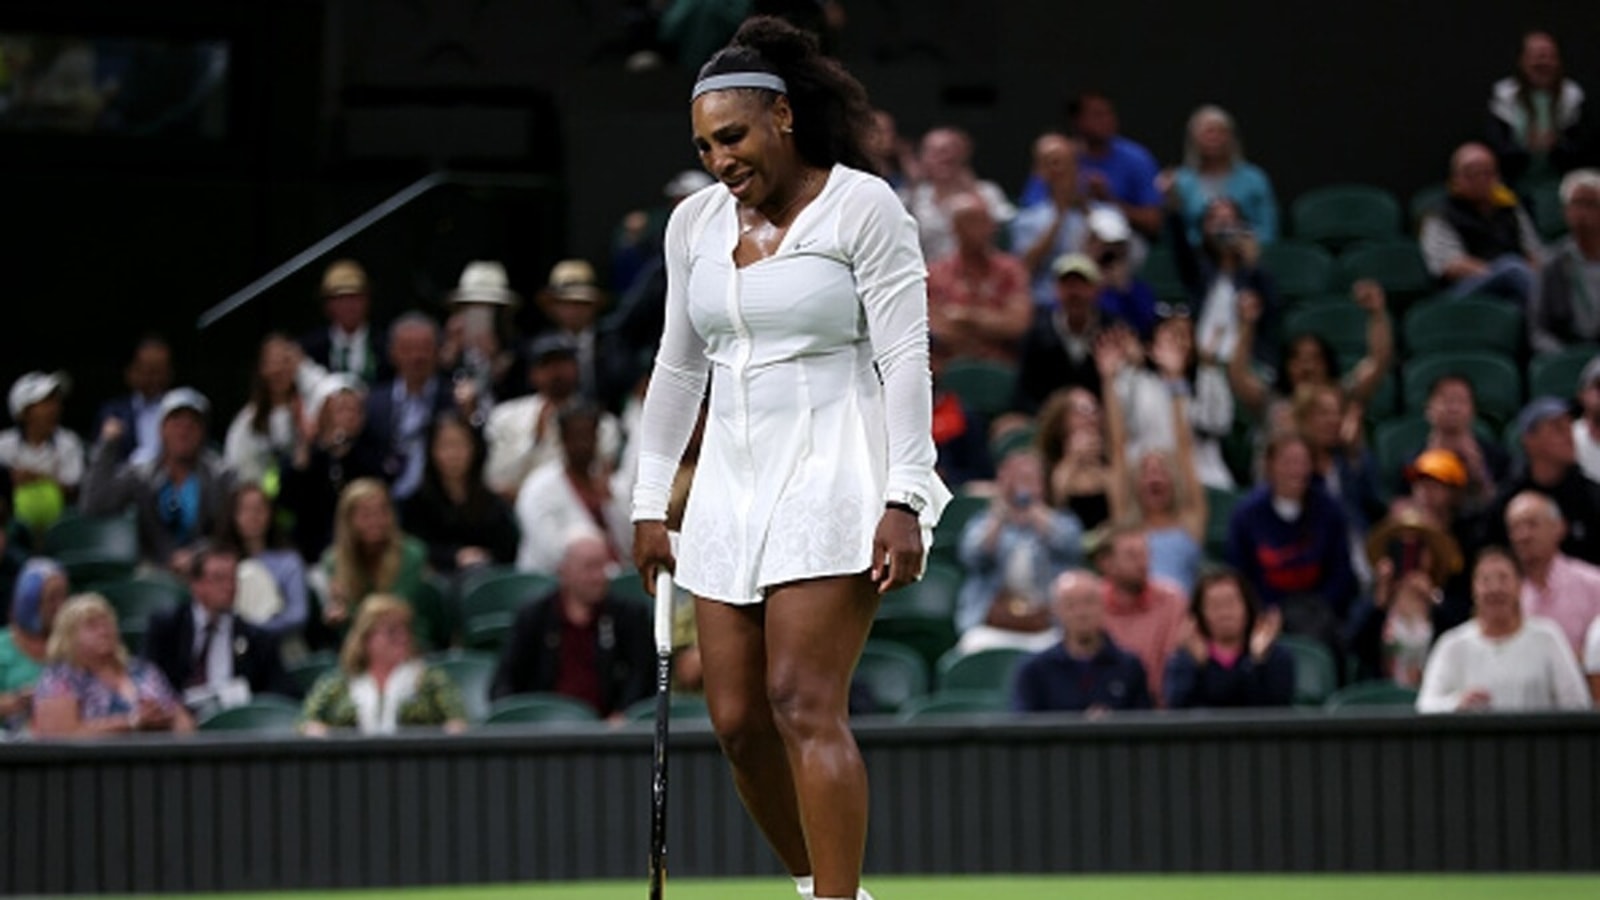 Serena Williams exits Wimbledon 2022 with first-round defeat to Harmony Tan Tennis News